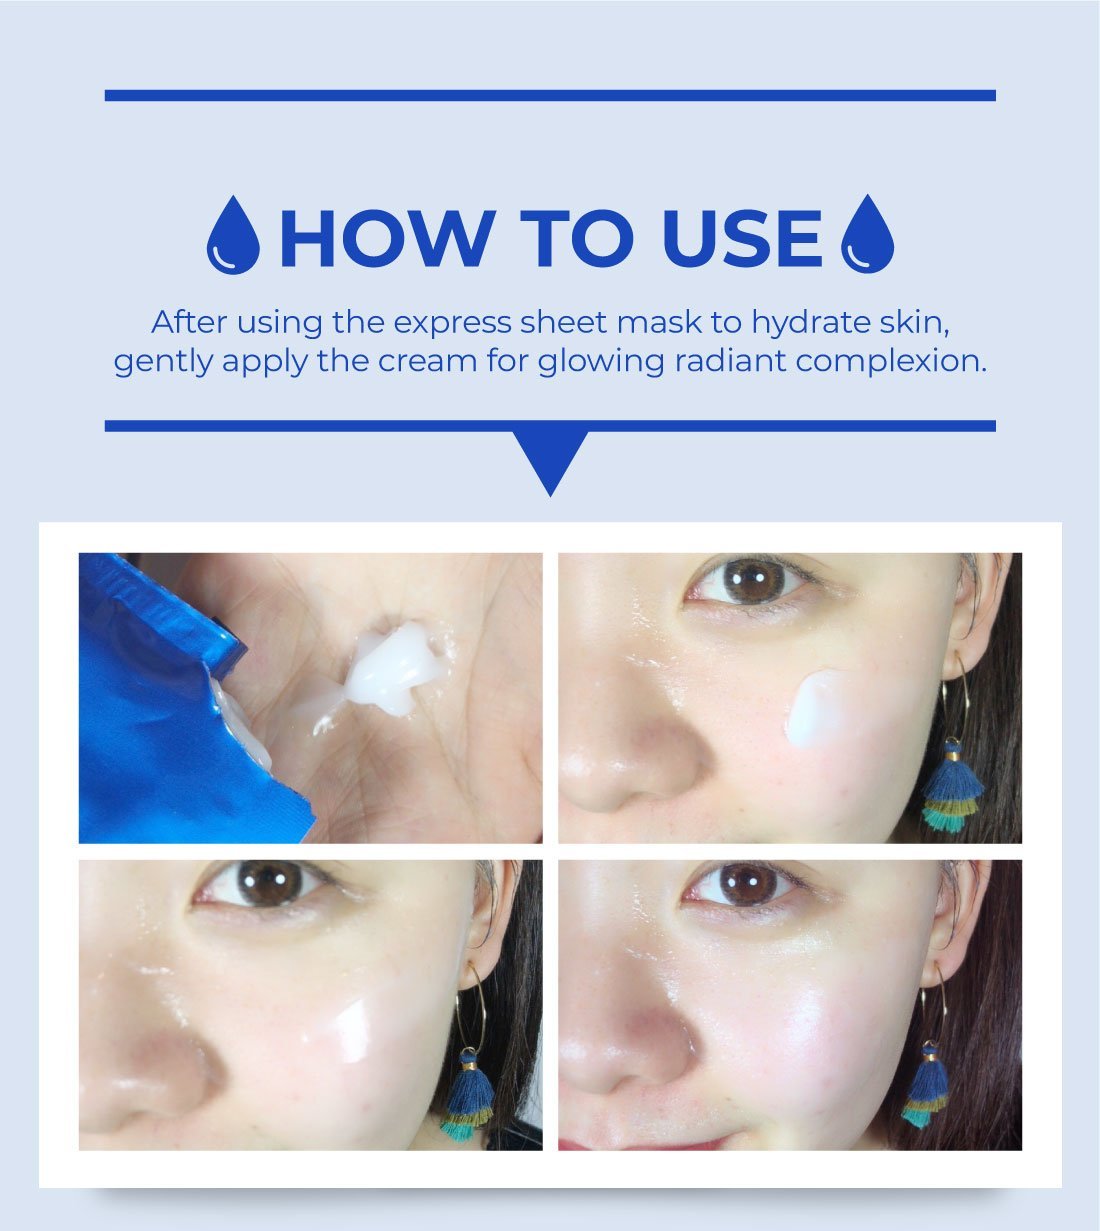 MIRAE 8 Minutes Mask - How to use